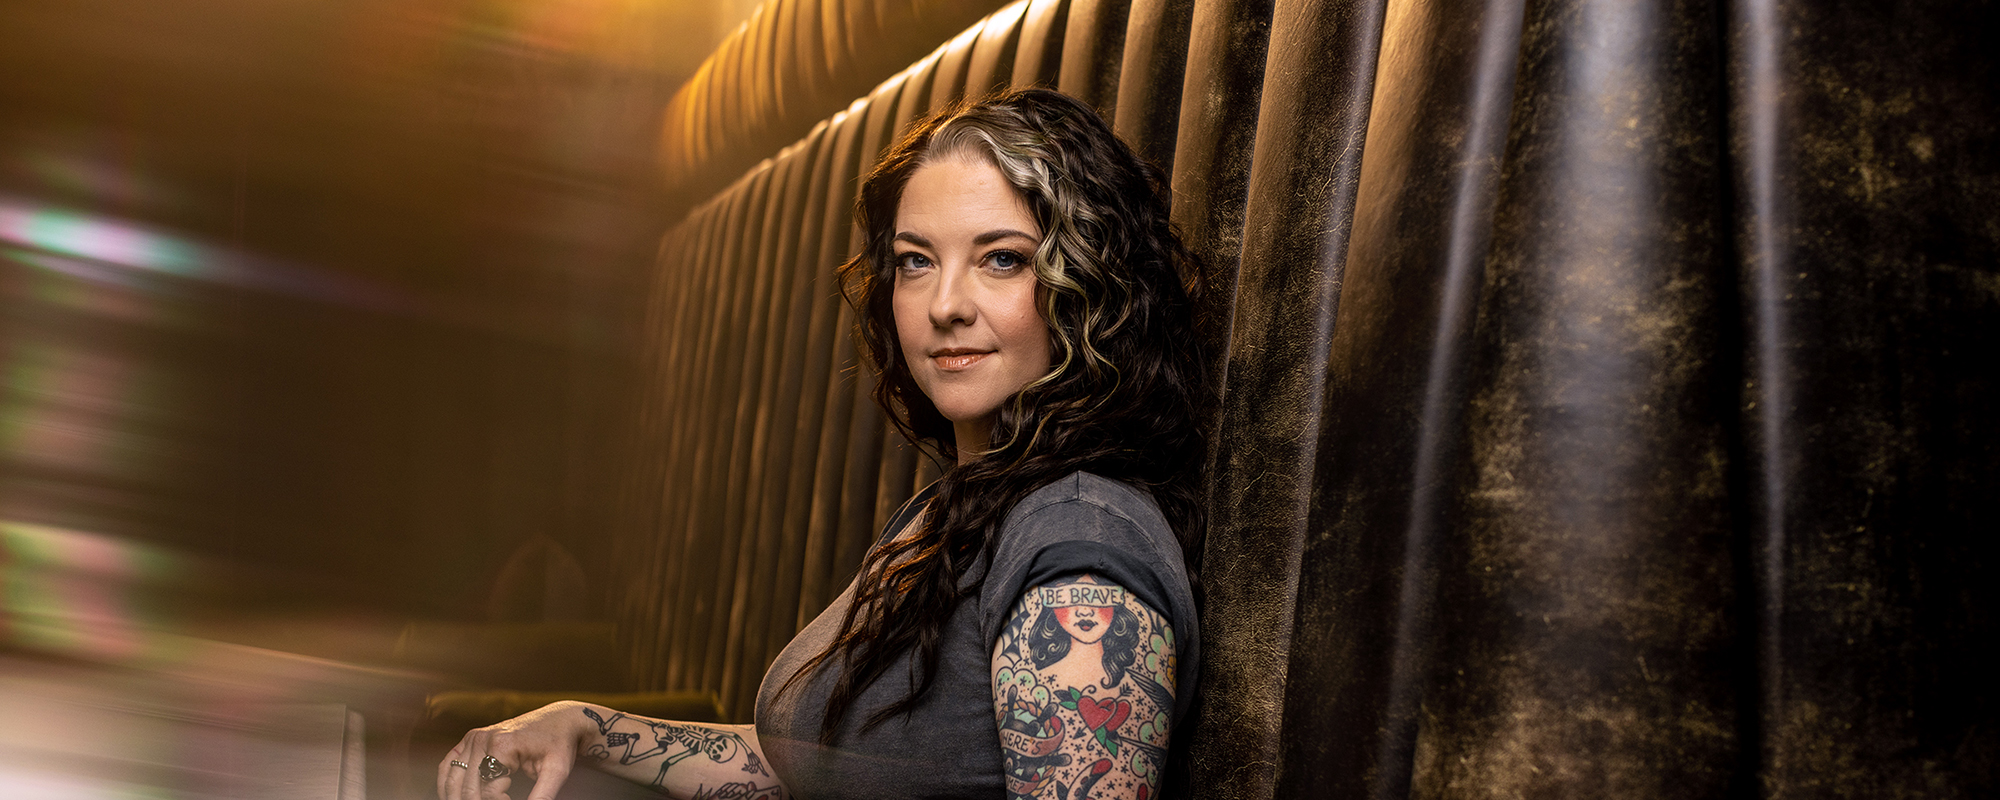 Ashley McBryde Sticks to Her Vices in “The Devil I Know”